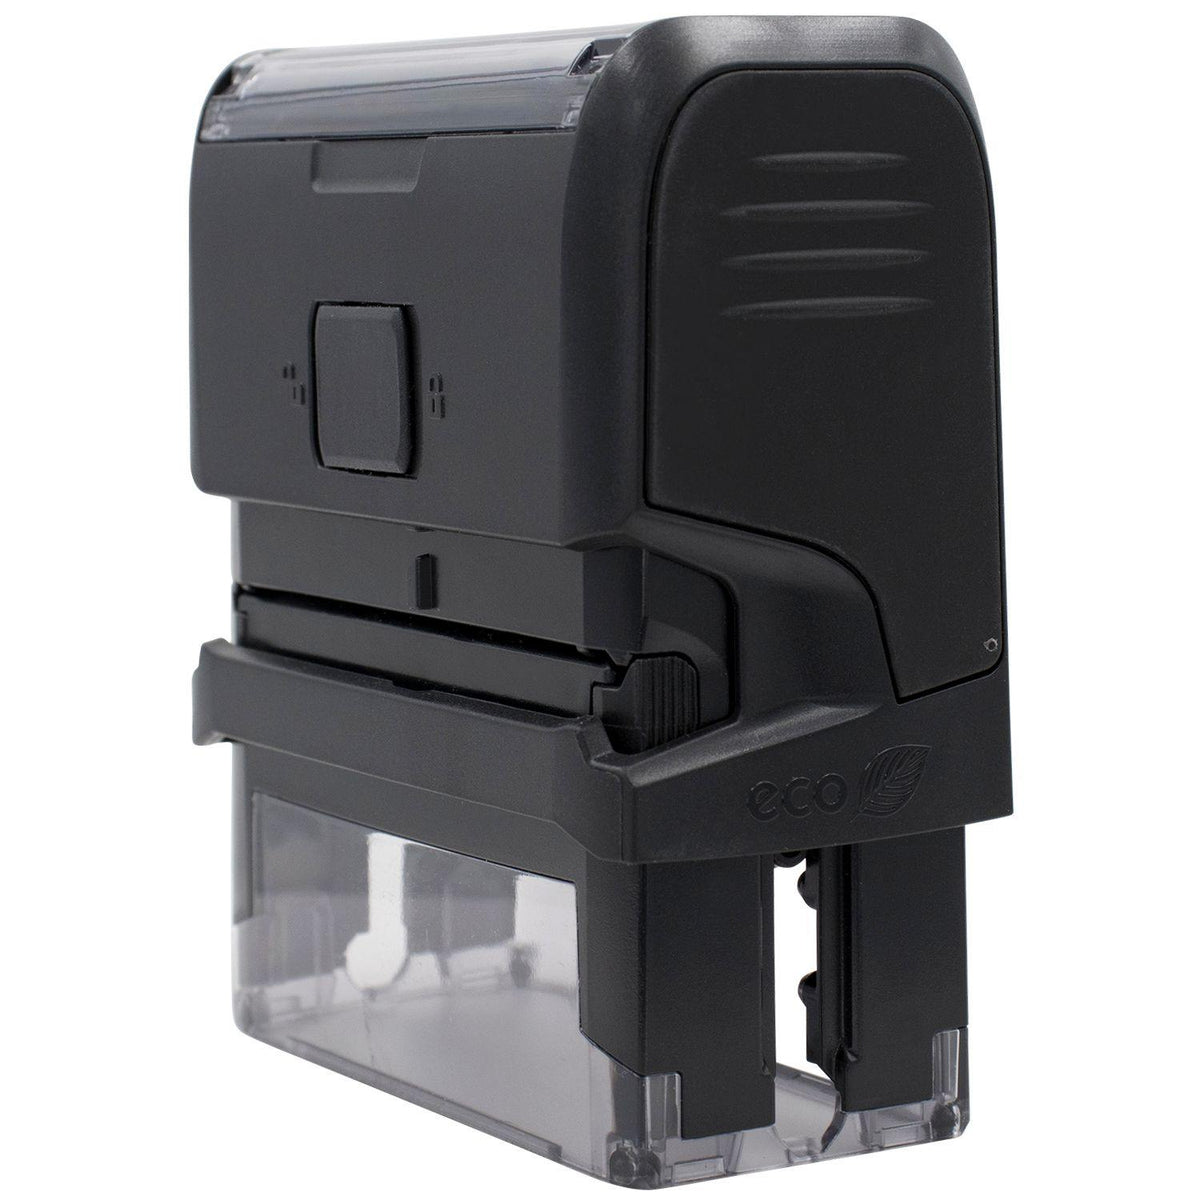 Self Inking Fax It 1 Stamp - Engineer Seal Stamps - Brand_Trodat, Impression Size_Large, Stamp Type_Self-Inking Stamp, Type of Use_Office